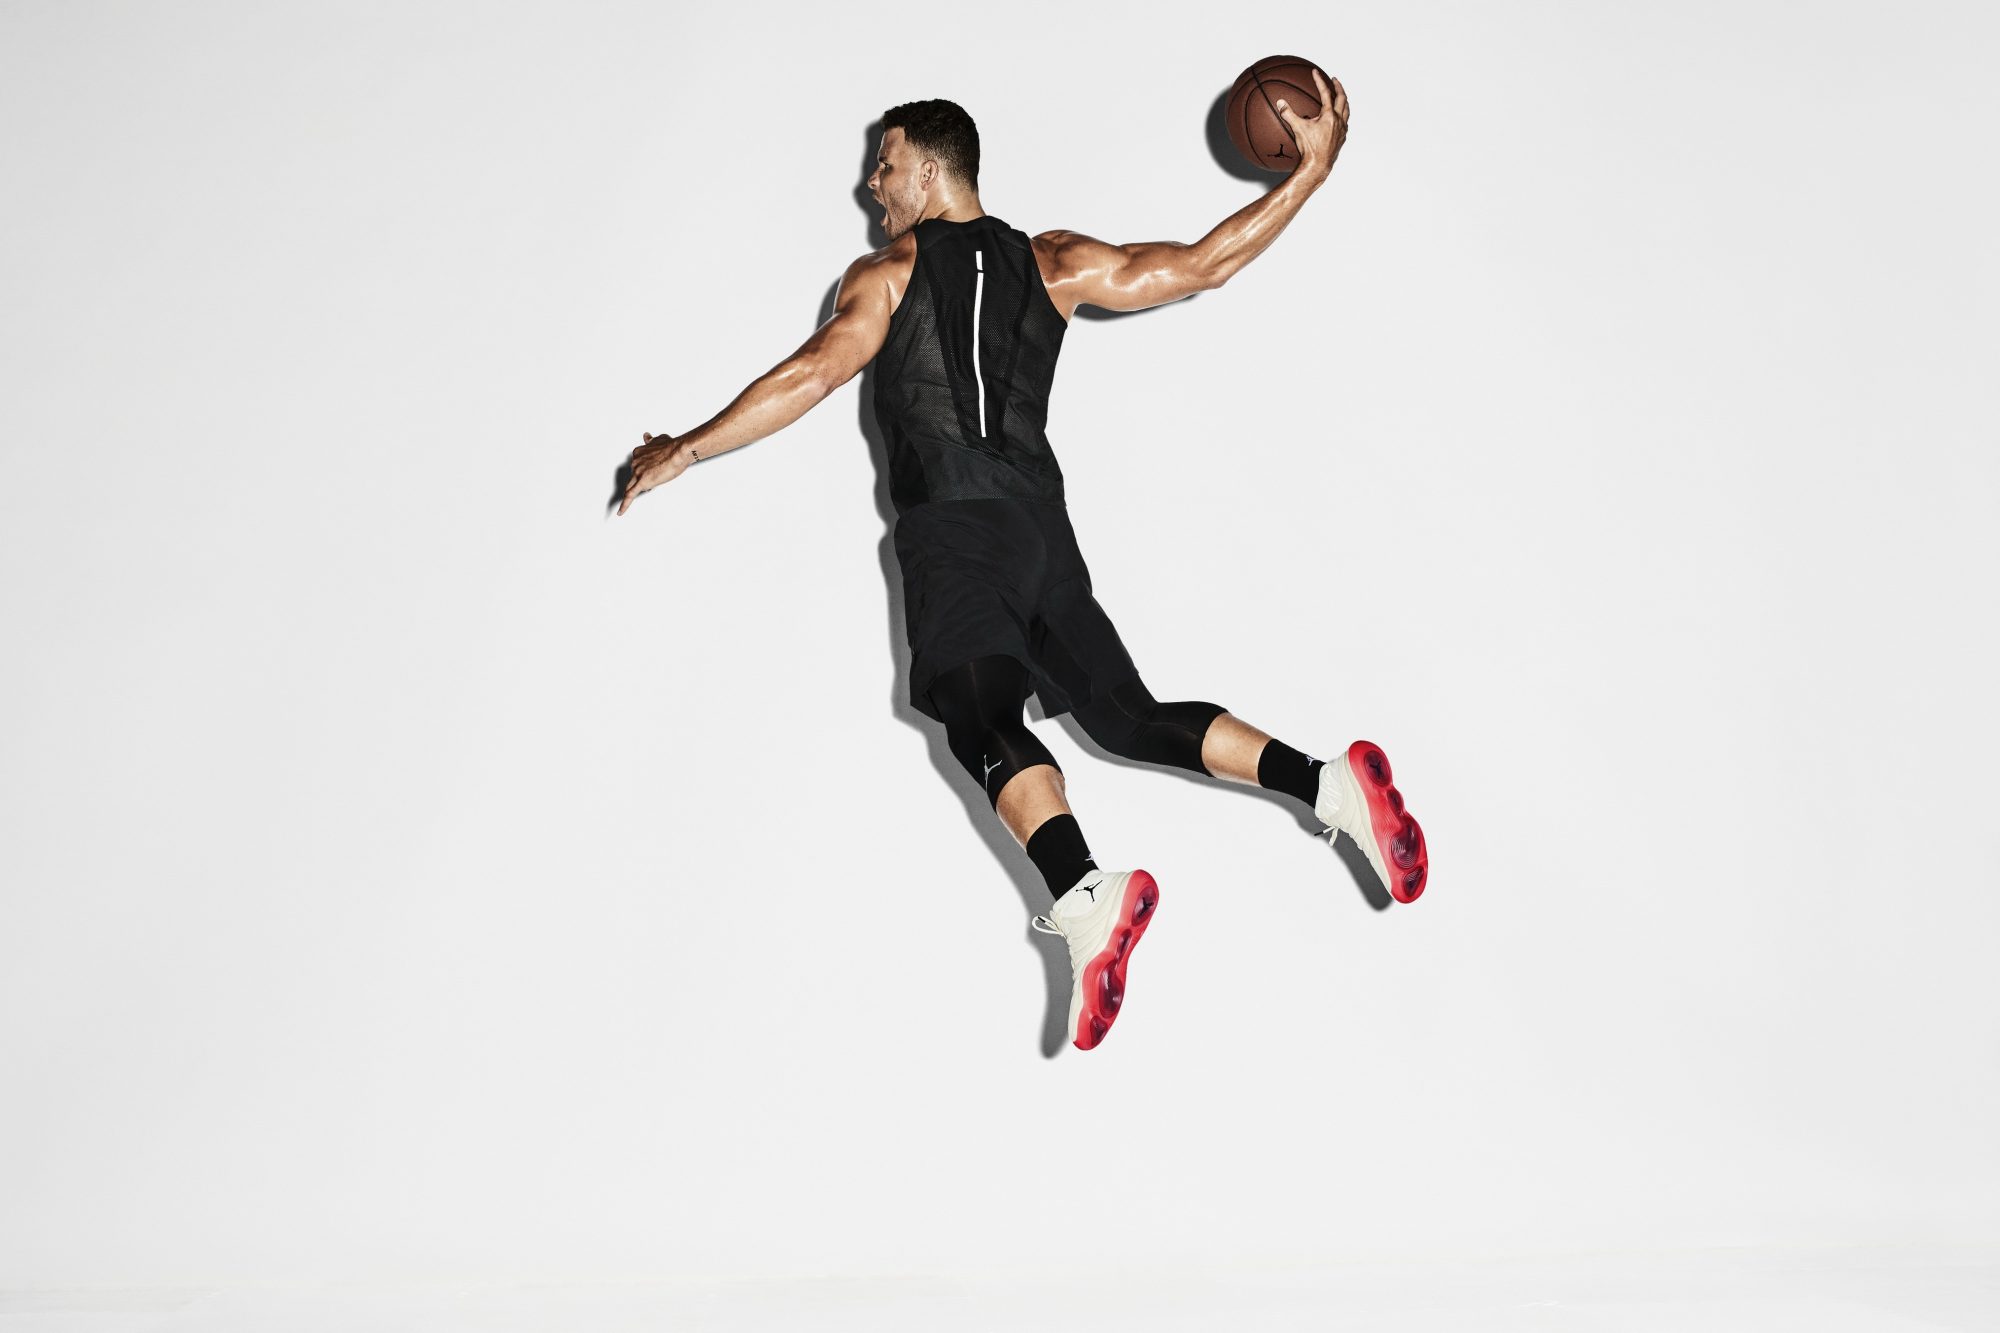 blake griffin superfly 5